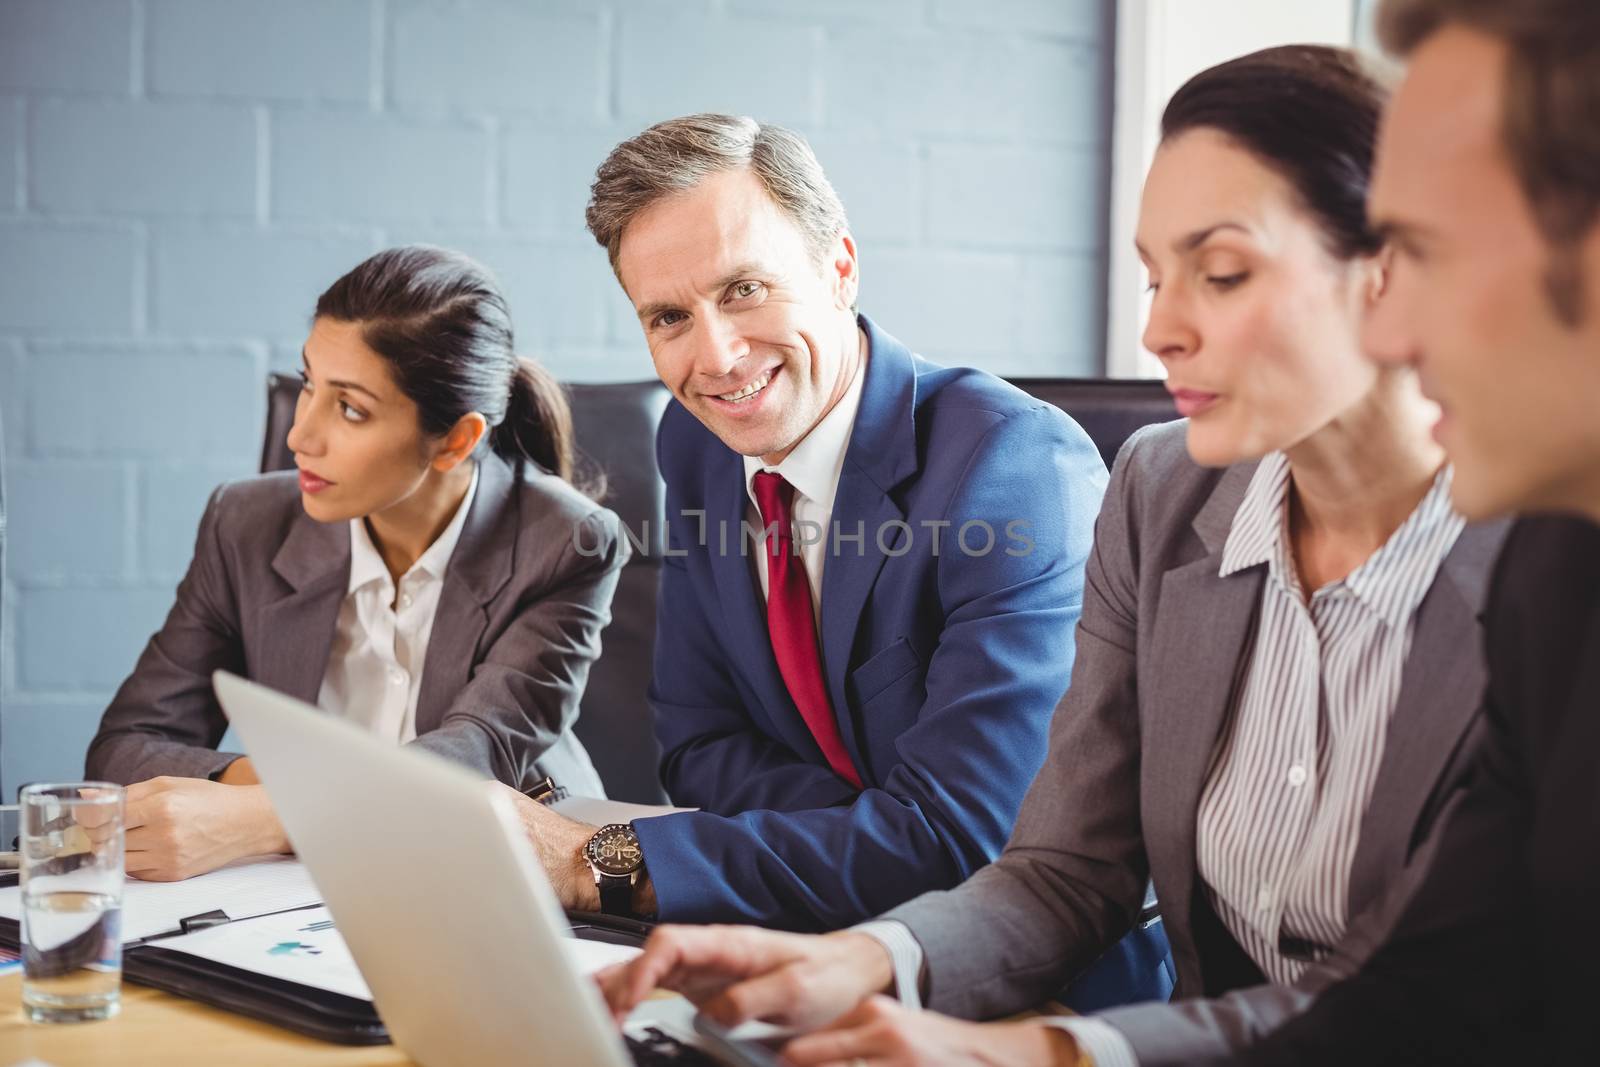 Businesspeople interacting in conference room during meeting